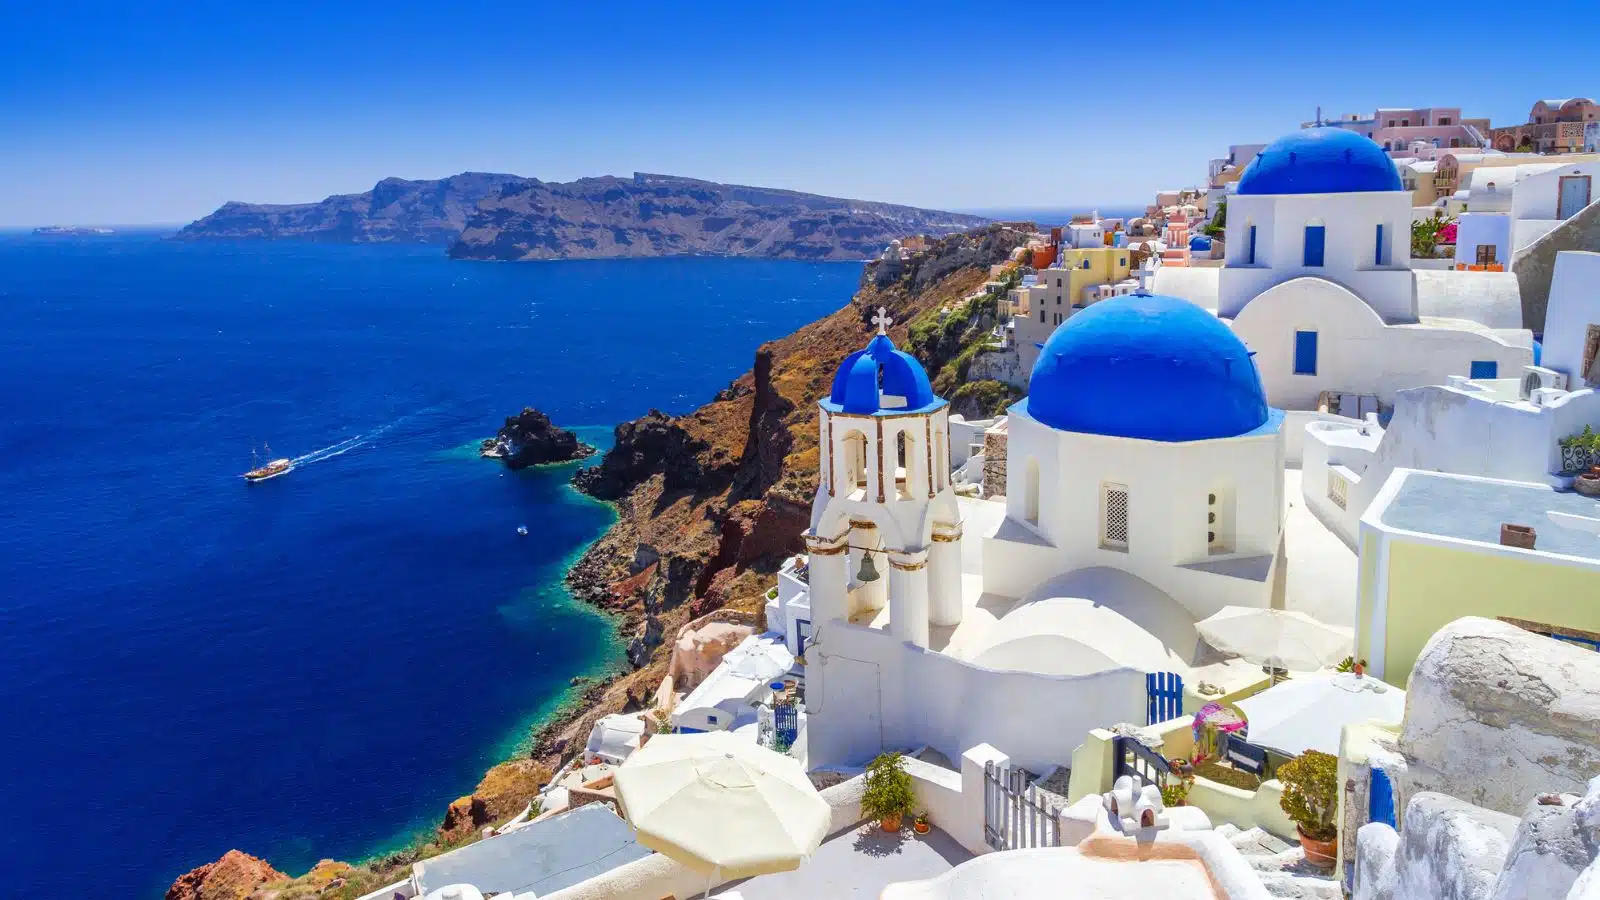 Cheap Retirement Countries: 10 Countries Where You Can Retire With $2,000 per Month